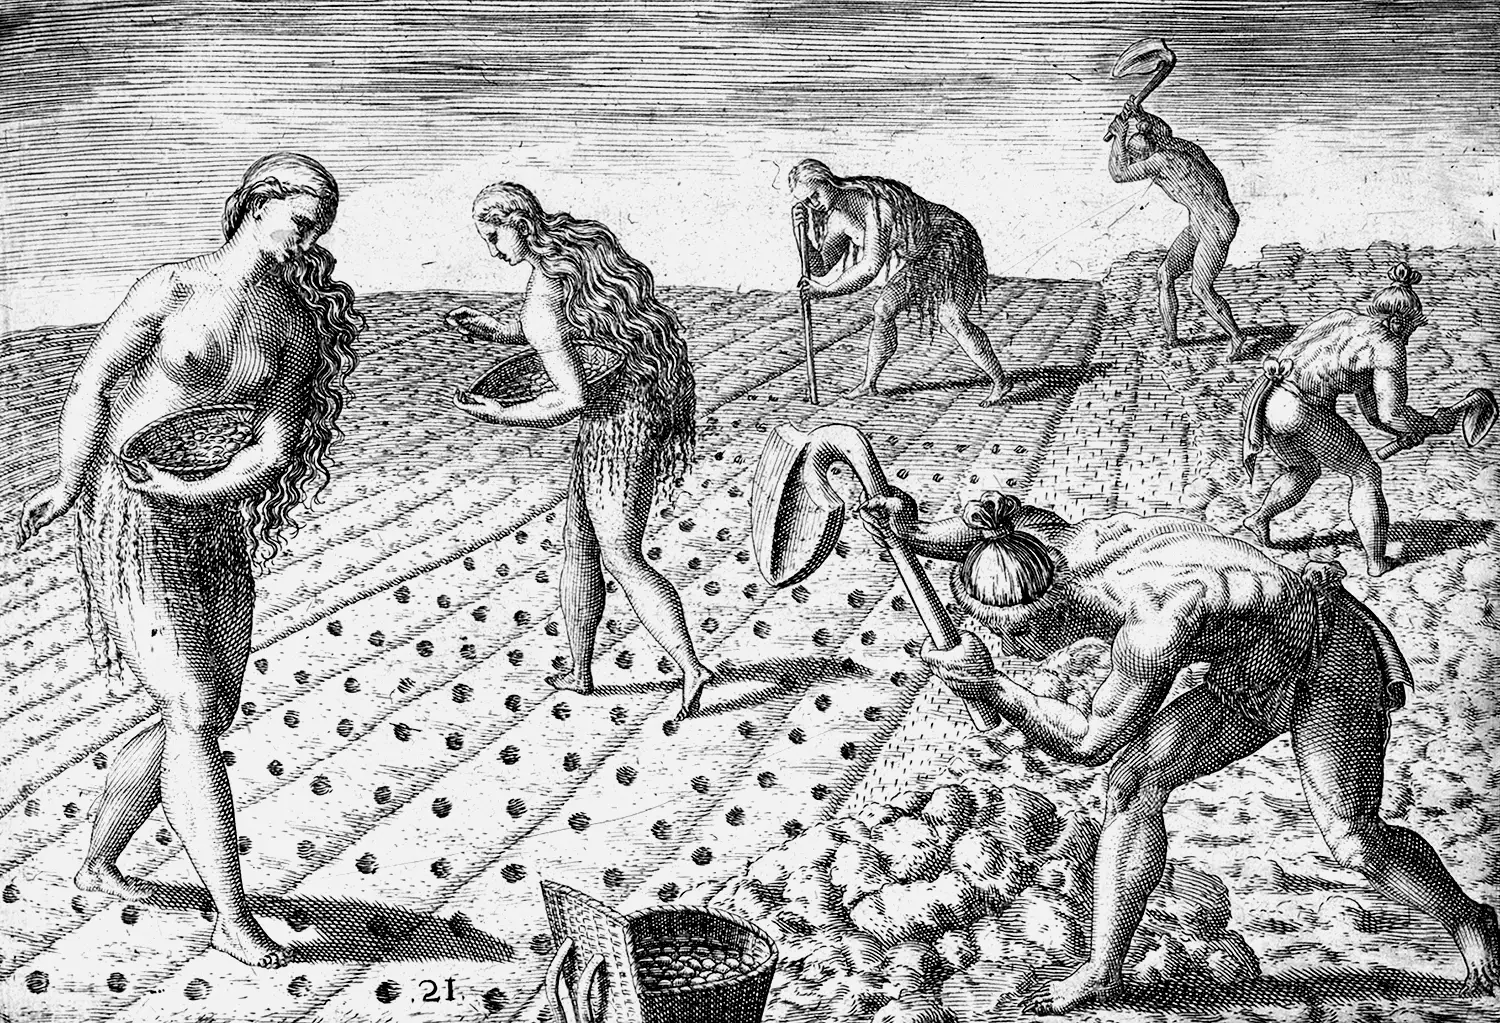 Barely clad men and women work a field. The women carry baskets of seeds and are sowing them in the field, while the men are bent over, laboring on the land with shovels.